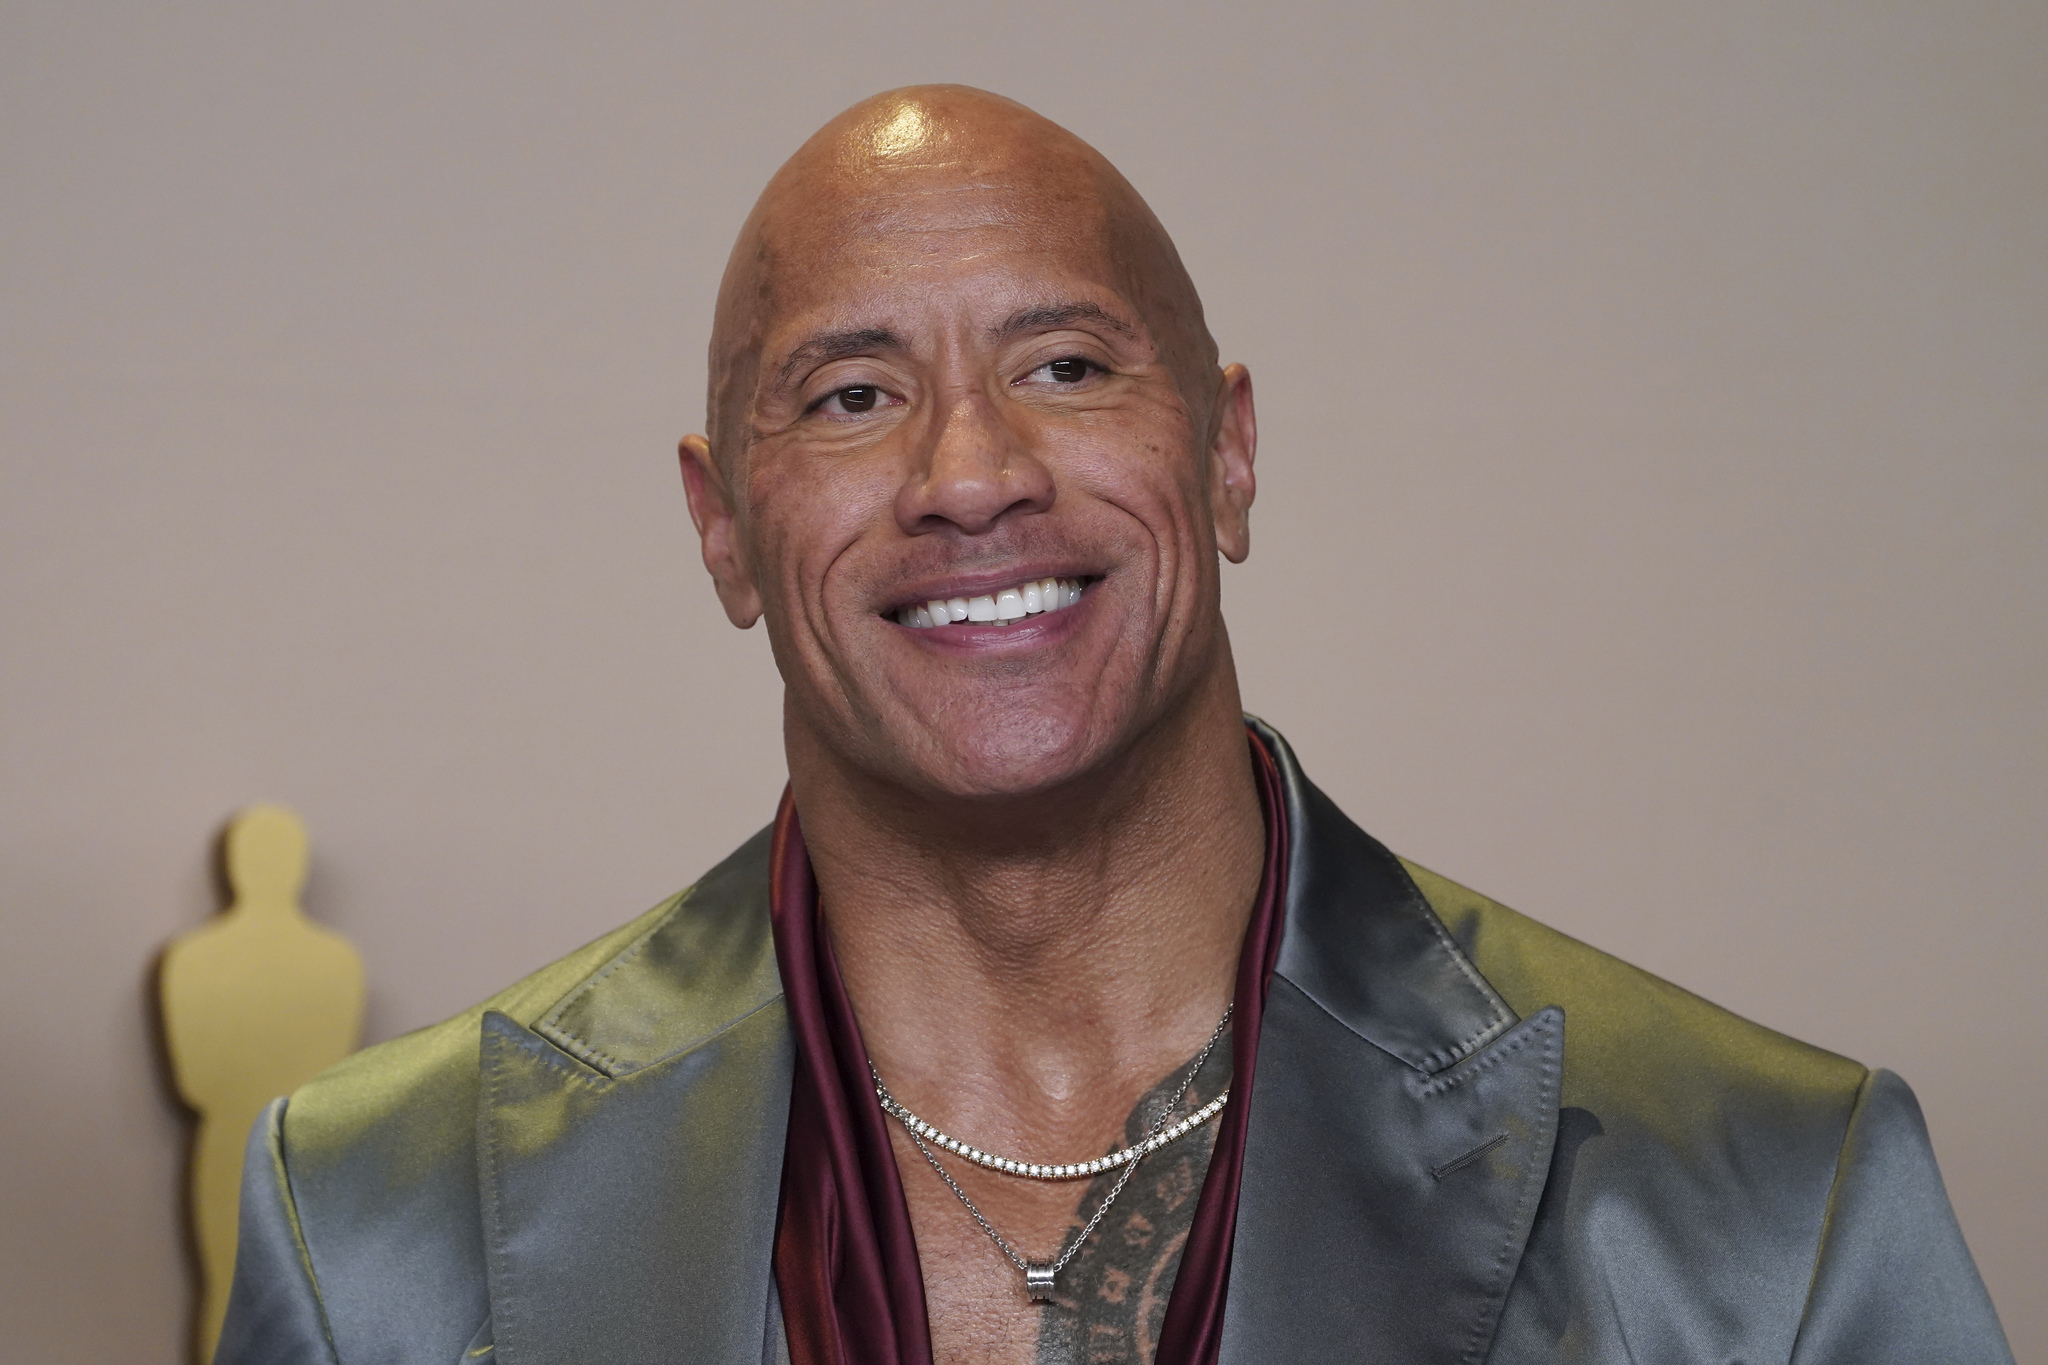 Dwayne The Rock Johnson poses in the press room at the Oscars